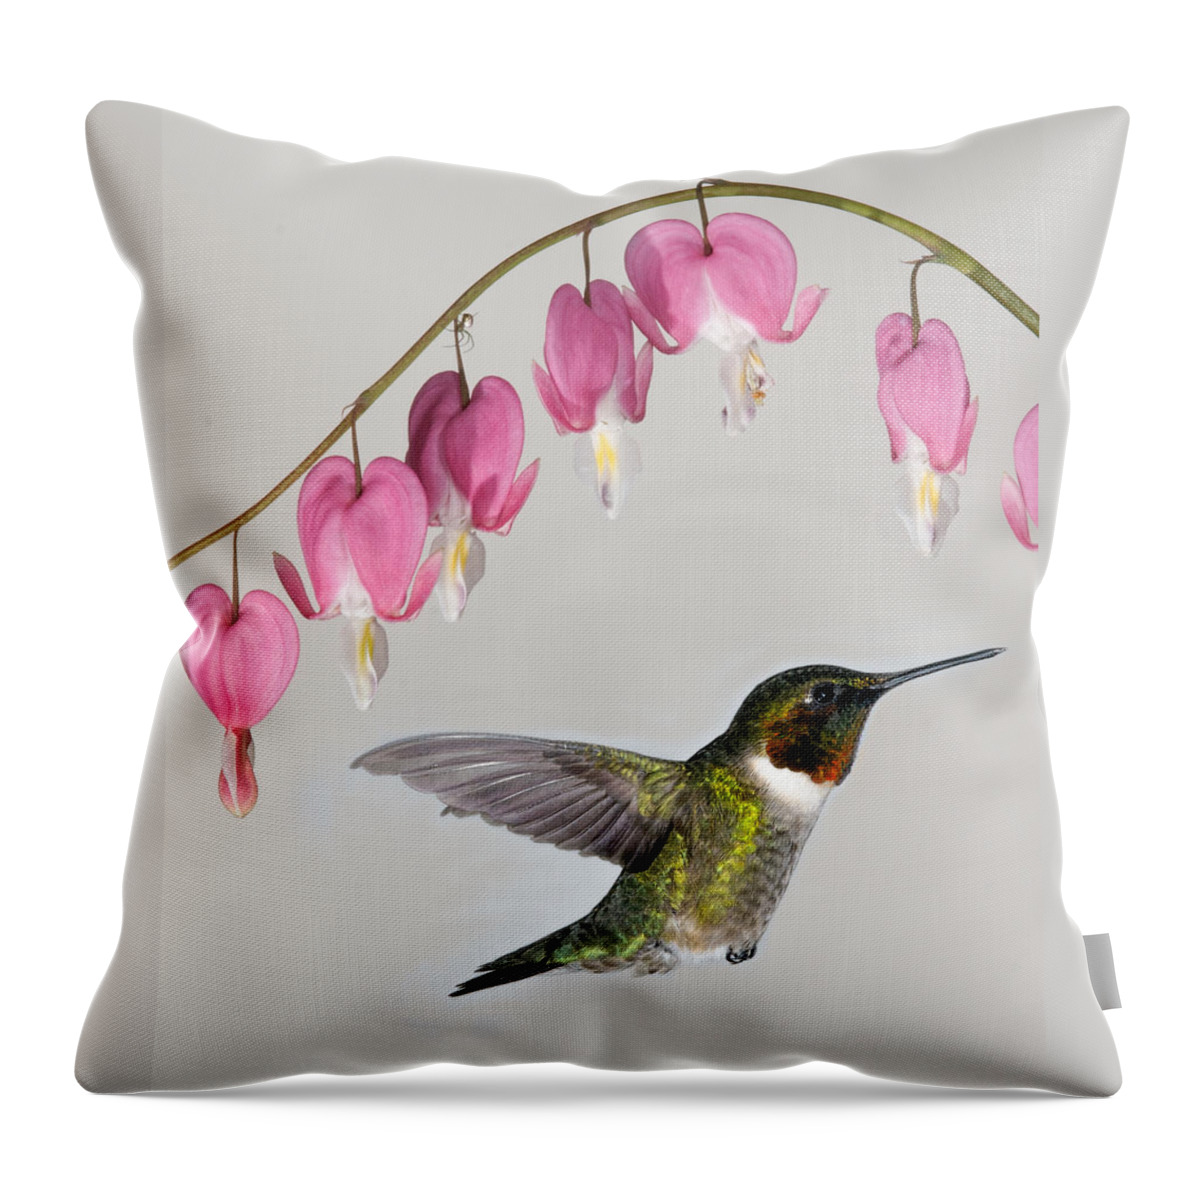 Archilochus Colubris Throw Pillow featuring the photograph Ruby-Throated Hummingbird With Bleeding Hearts by Lara Ellis